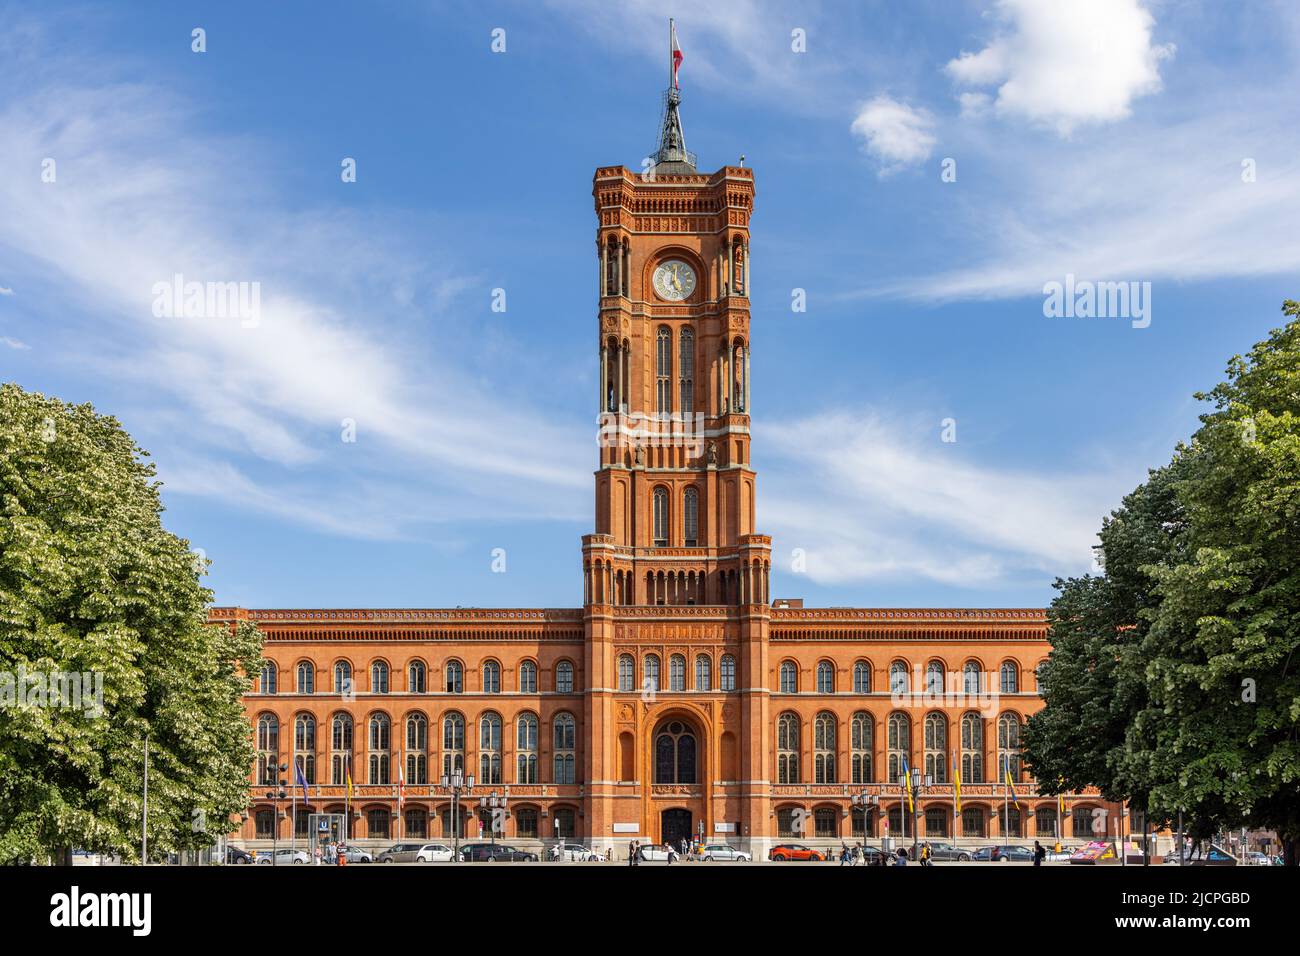 The Rotes Rathaus (Red City Hall), the seat of the mayor and city government, Rathausstrasse, Berlin, Germany Stock Photo